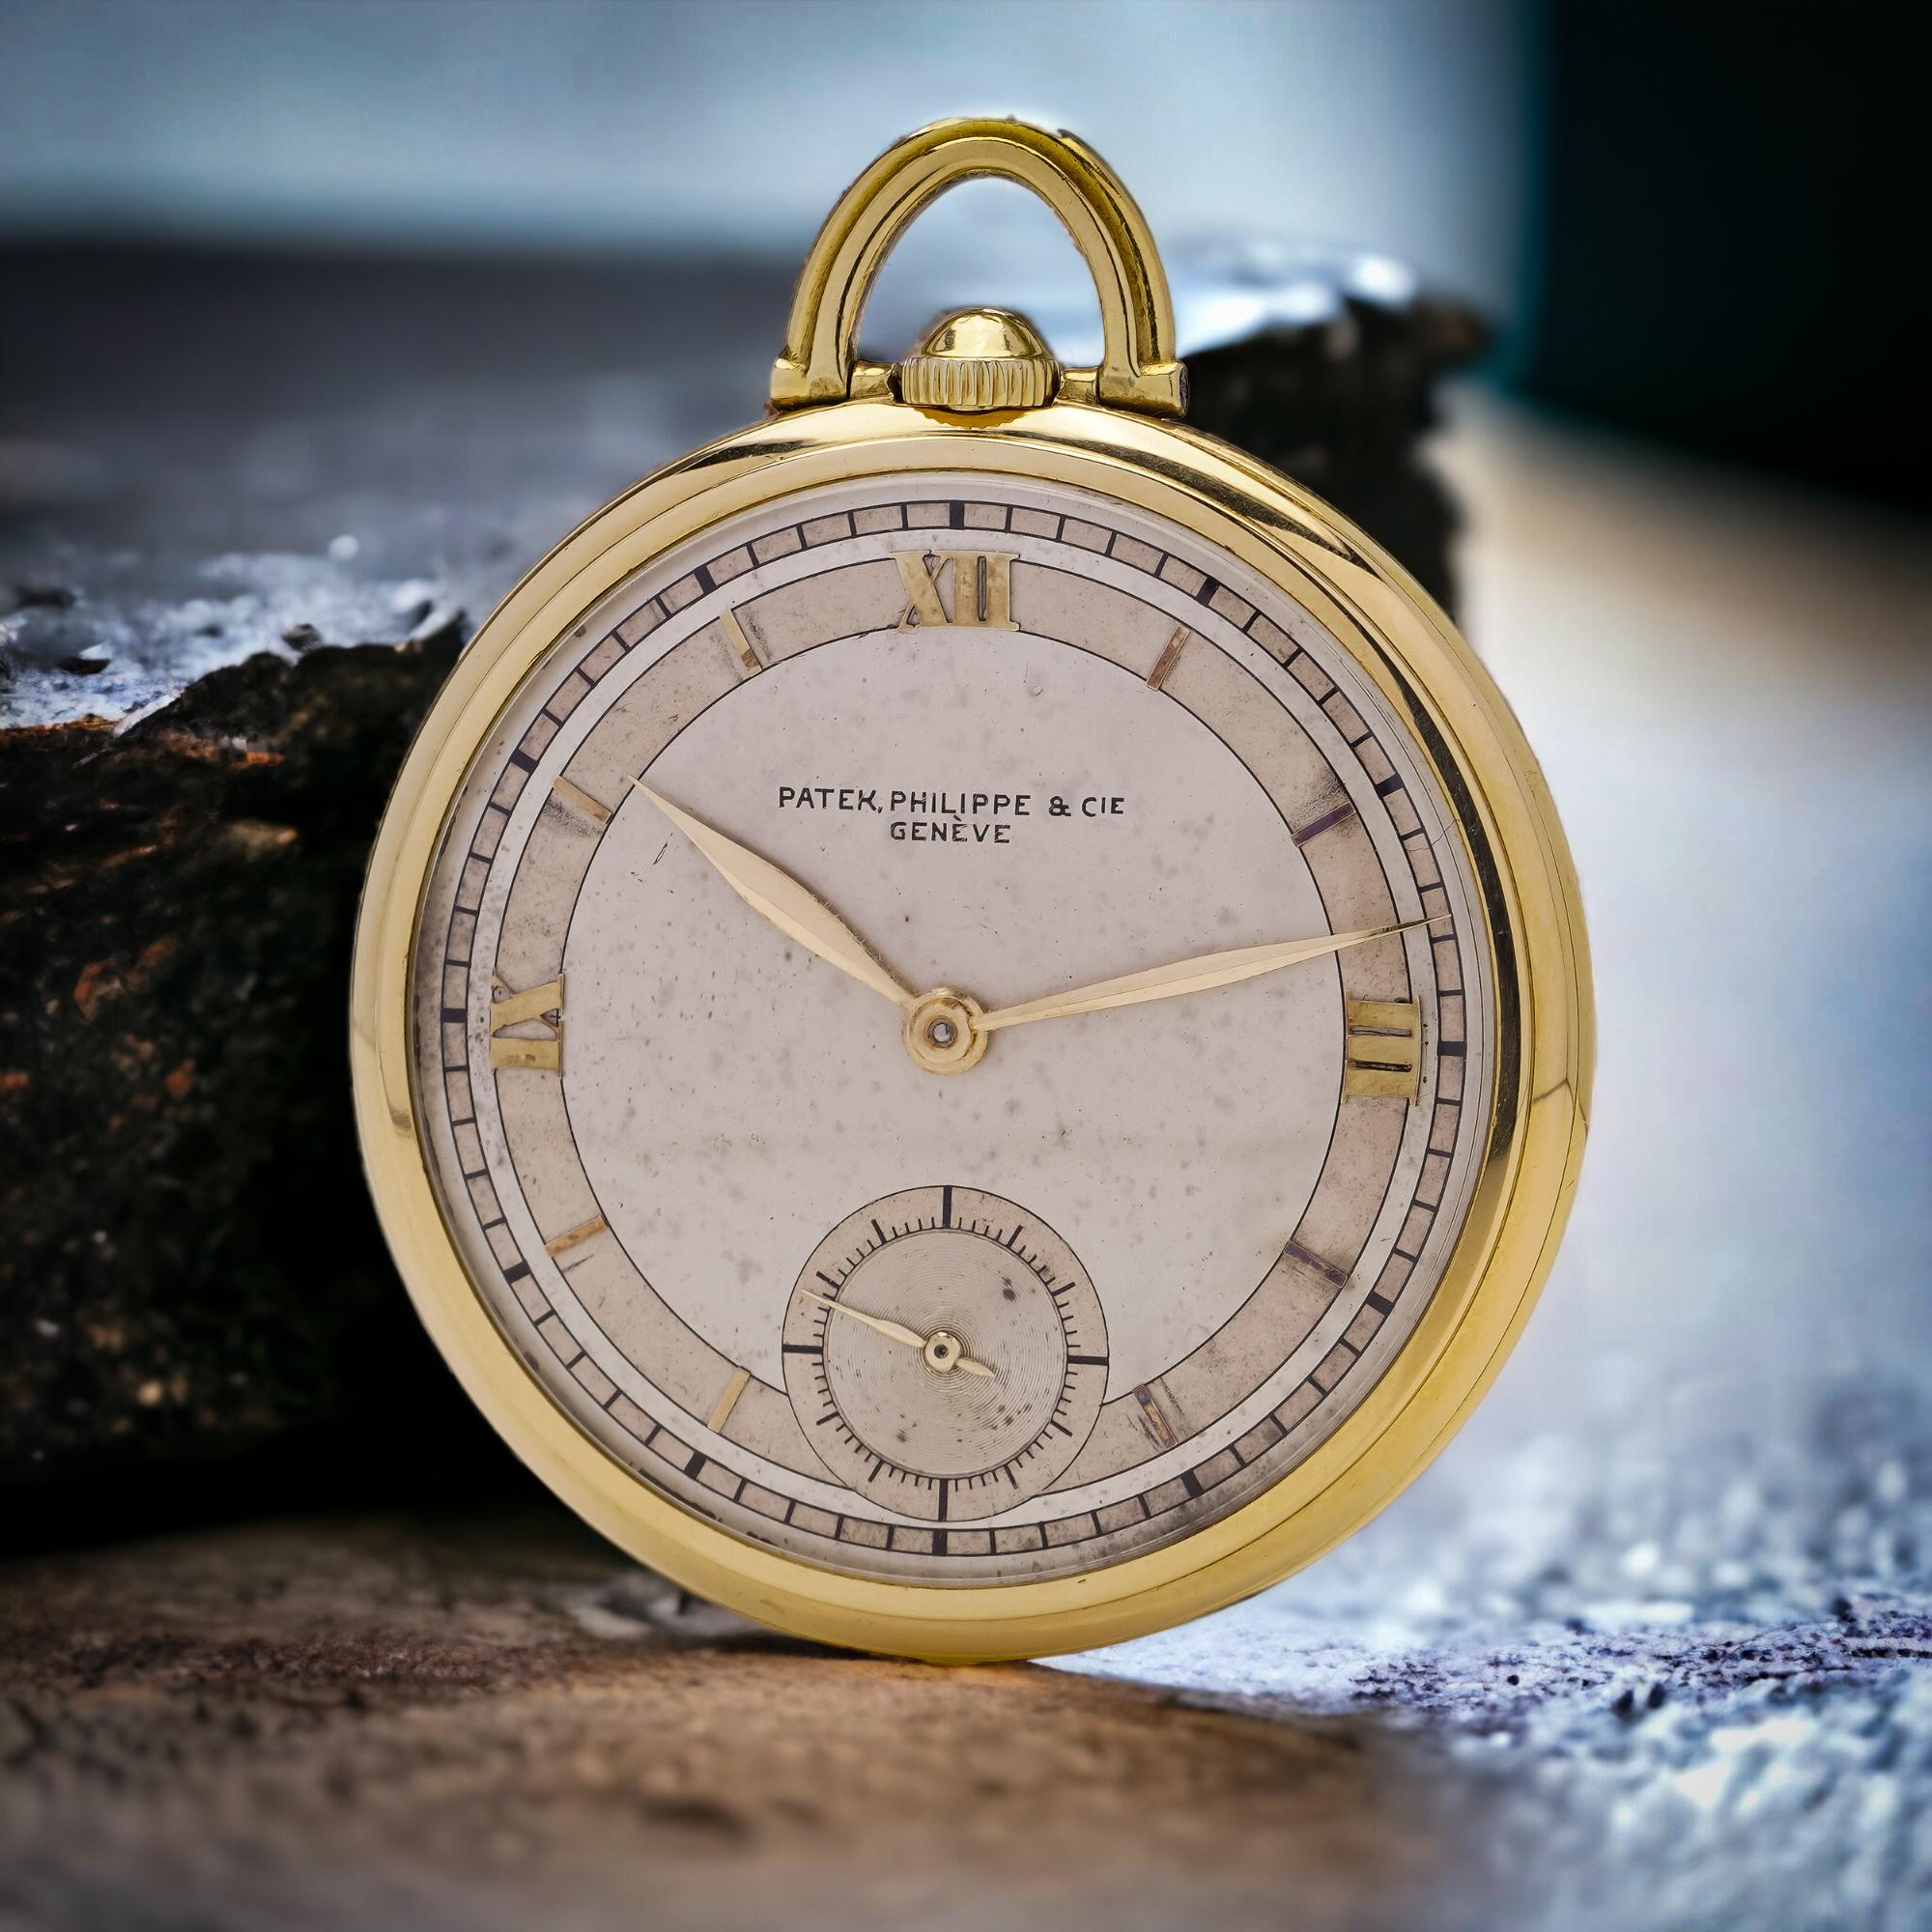 Patek Philippe Art Deco period  18kt. yellow gold open-face pocket watch.

Made in Switzerland, Circa 1930's 

Details:
Case diameter: 42 mm
Case shape: Round 
Movement: Manual wind, 18 jewels 
Case Material: 18kt gold 
Dial: Gold 
Numerals: Roman